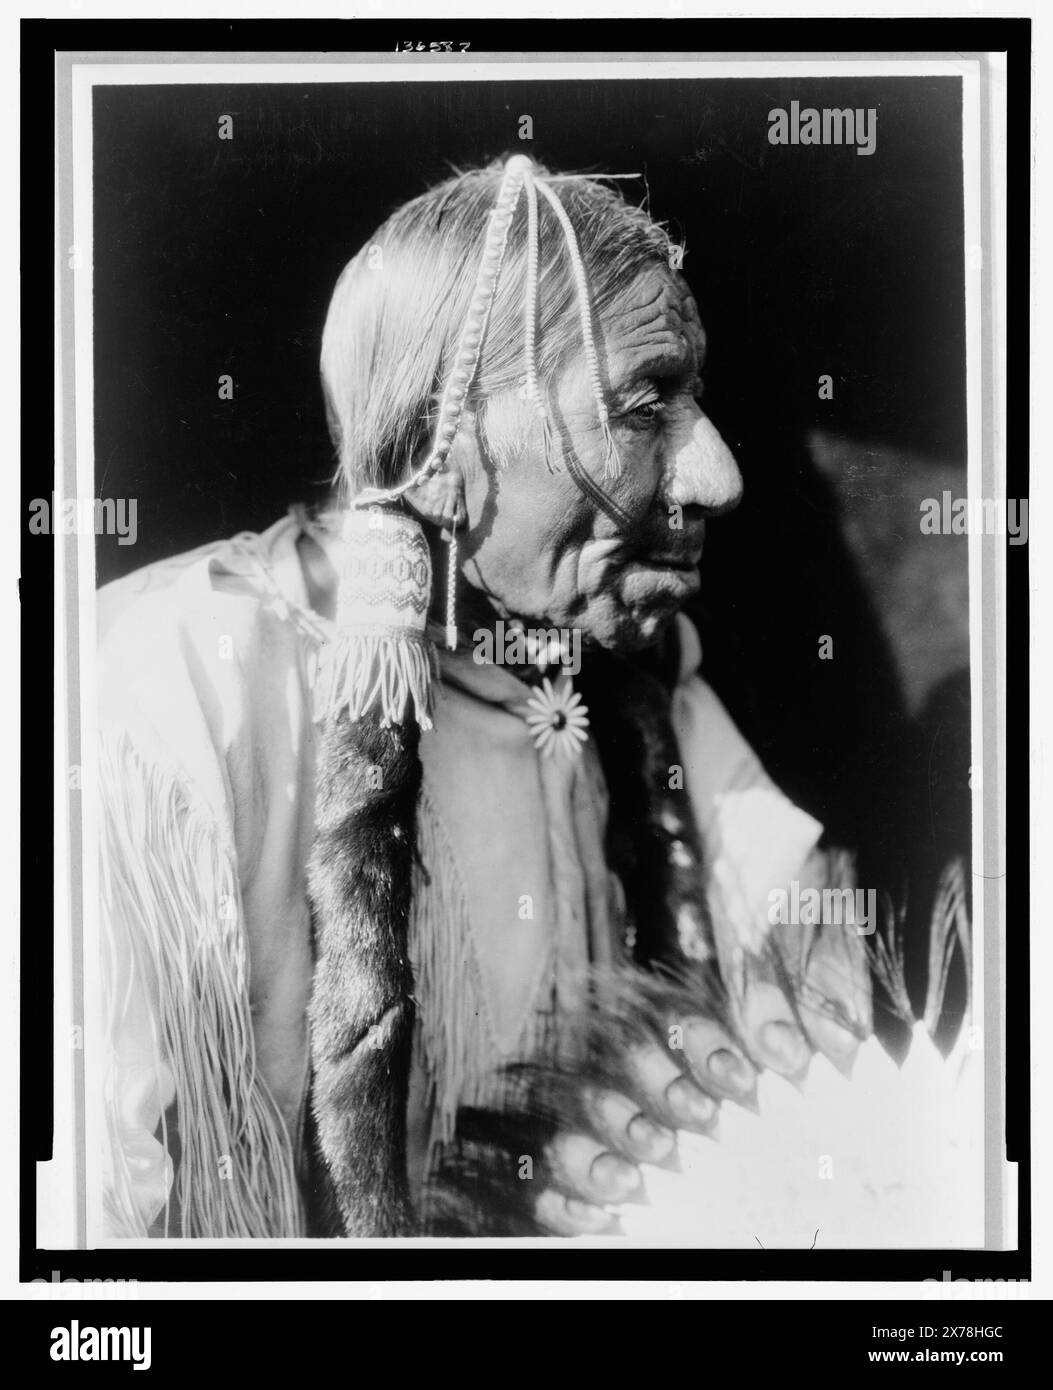 Esipėrmi Comanche, Title from item., Forms part of: Edward S. Curtis Collection ., Published in: The North American Indian / Edward S. Curtis. [Seattle, Wash.] : Edward S. Curtis, 1907-30, Suppl. v. 19, pl. 682.. Indians of North America, 1920-1930. , Comanche Indians, 1920-1930. , Aged persons, 1920-1930. Stock Photo